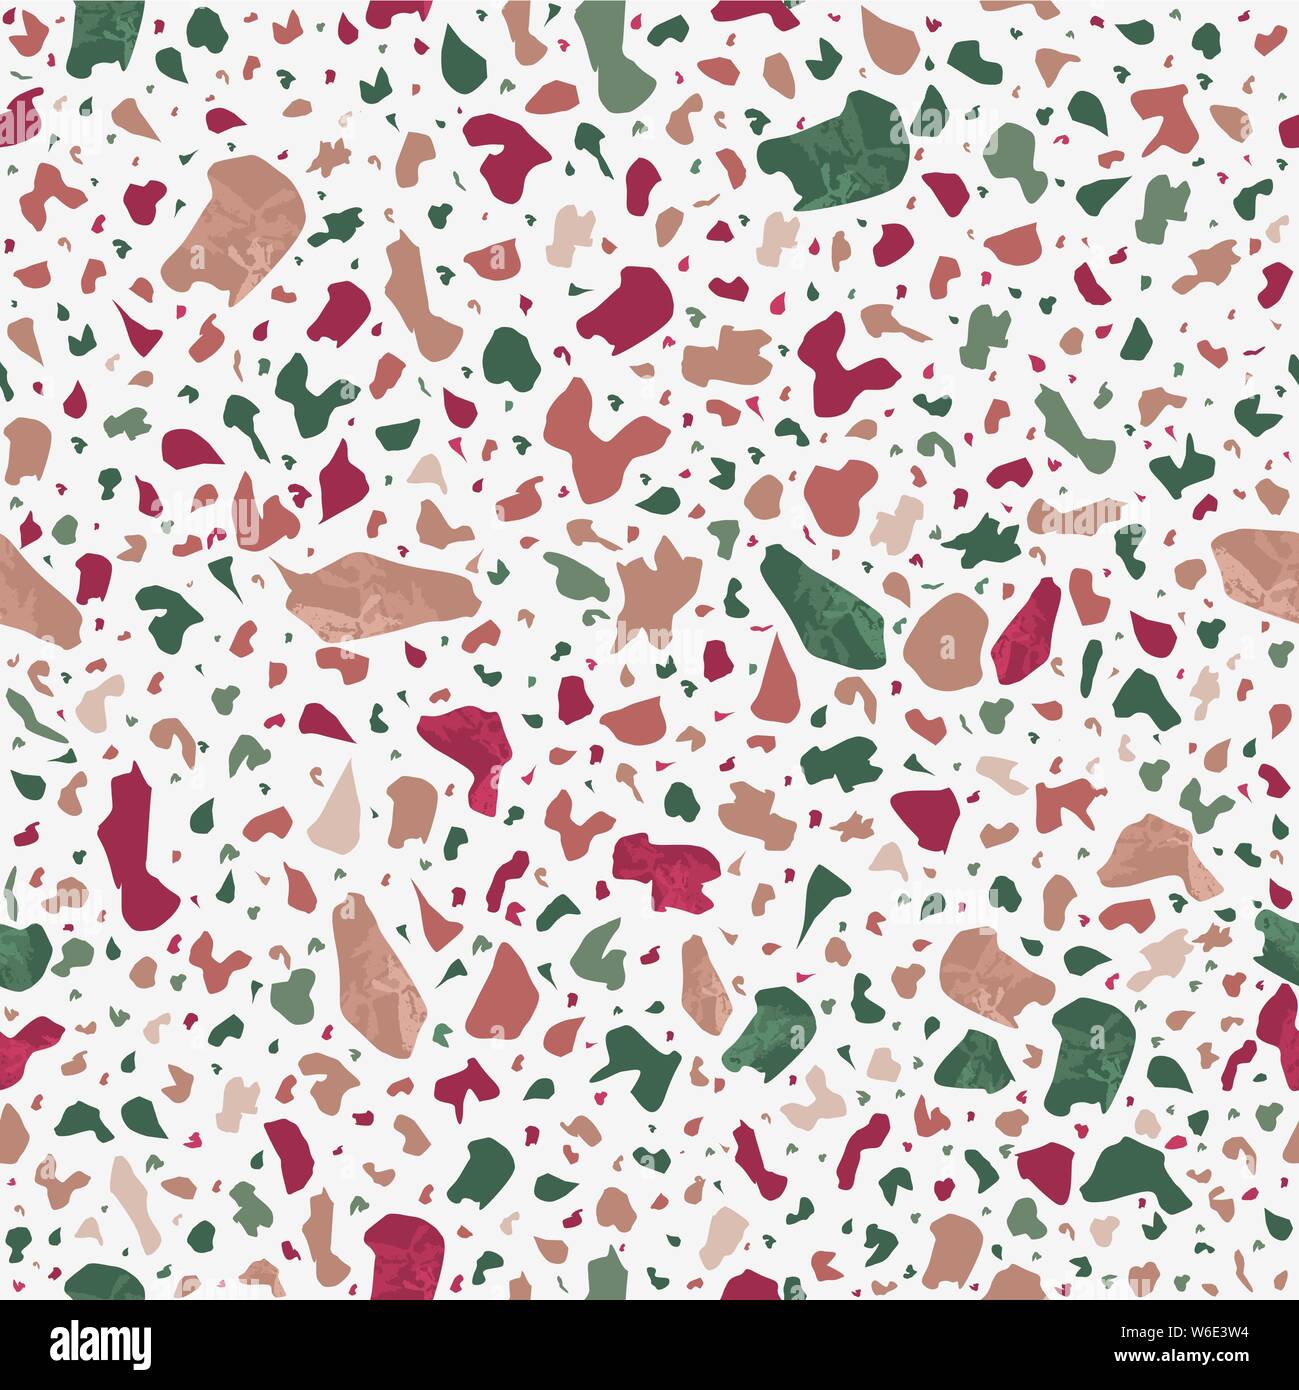 Colorful terrazzo flooring seamless pattern with realistic color stones and rocks on white background. Traditional stone material tile illustration. Stock Vector